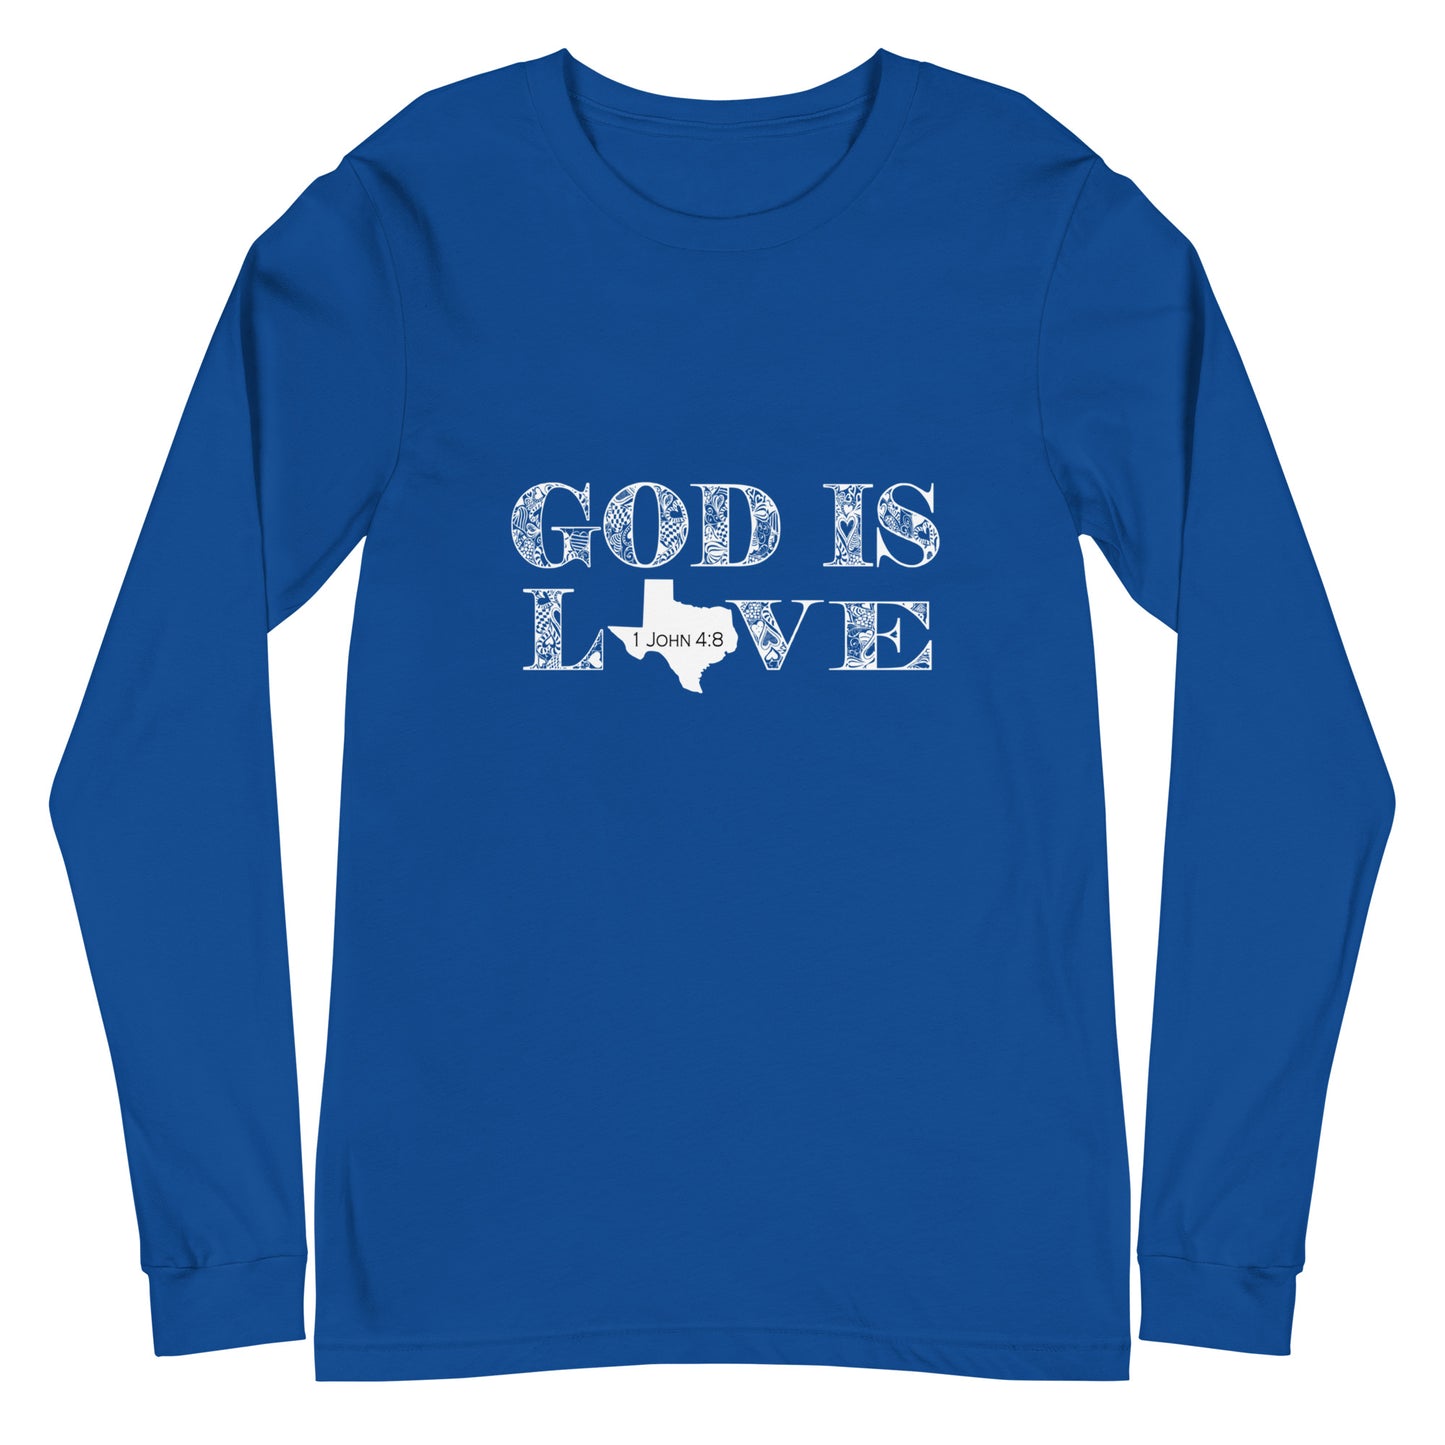 Graphic Christian true royal long-sleeve tee with 1 John 4:8 on it. This piece of Christian apparel is a reminder of who God is. Grab this unique long-sleeve tee from the Christian-based company Olive Grove Life.